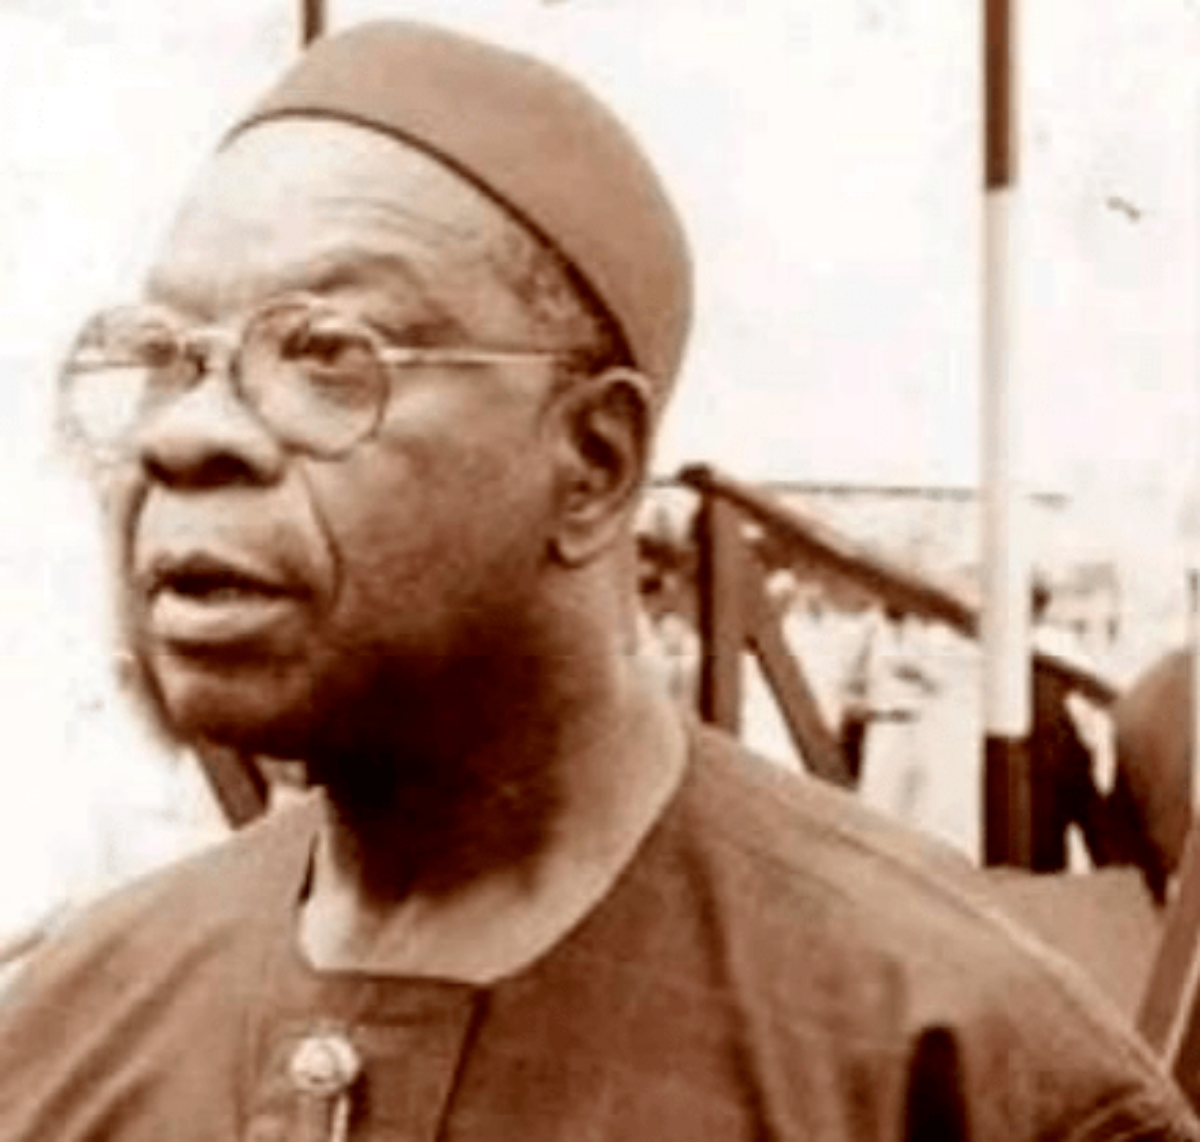 In 1999, This Nigerian Senate President was Removed Over Whether ...